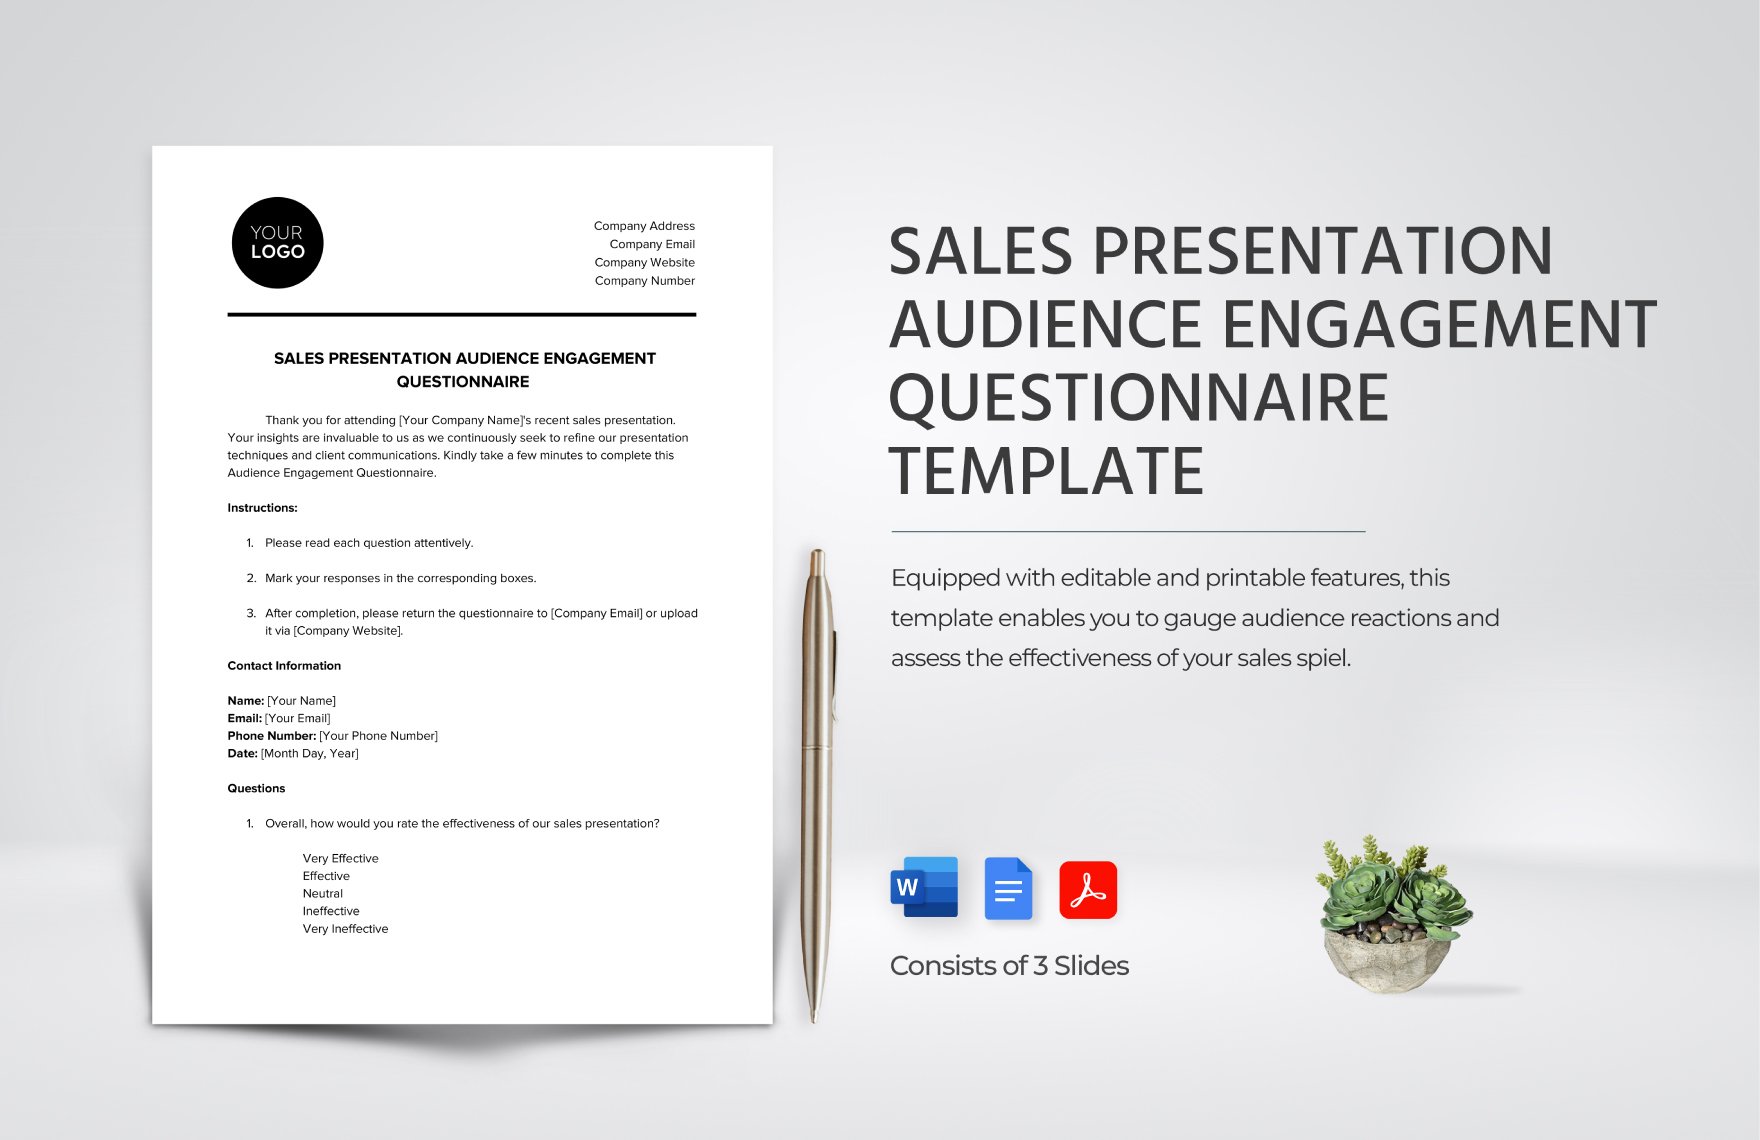 Sales Presentation Audience Engagement Questionnaire Template in Word, Google Docs, PDF